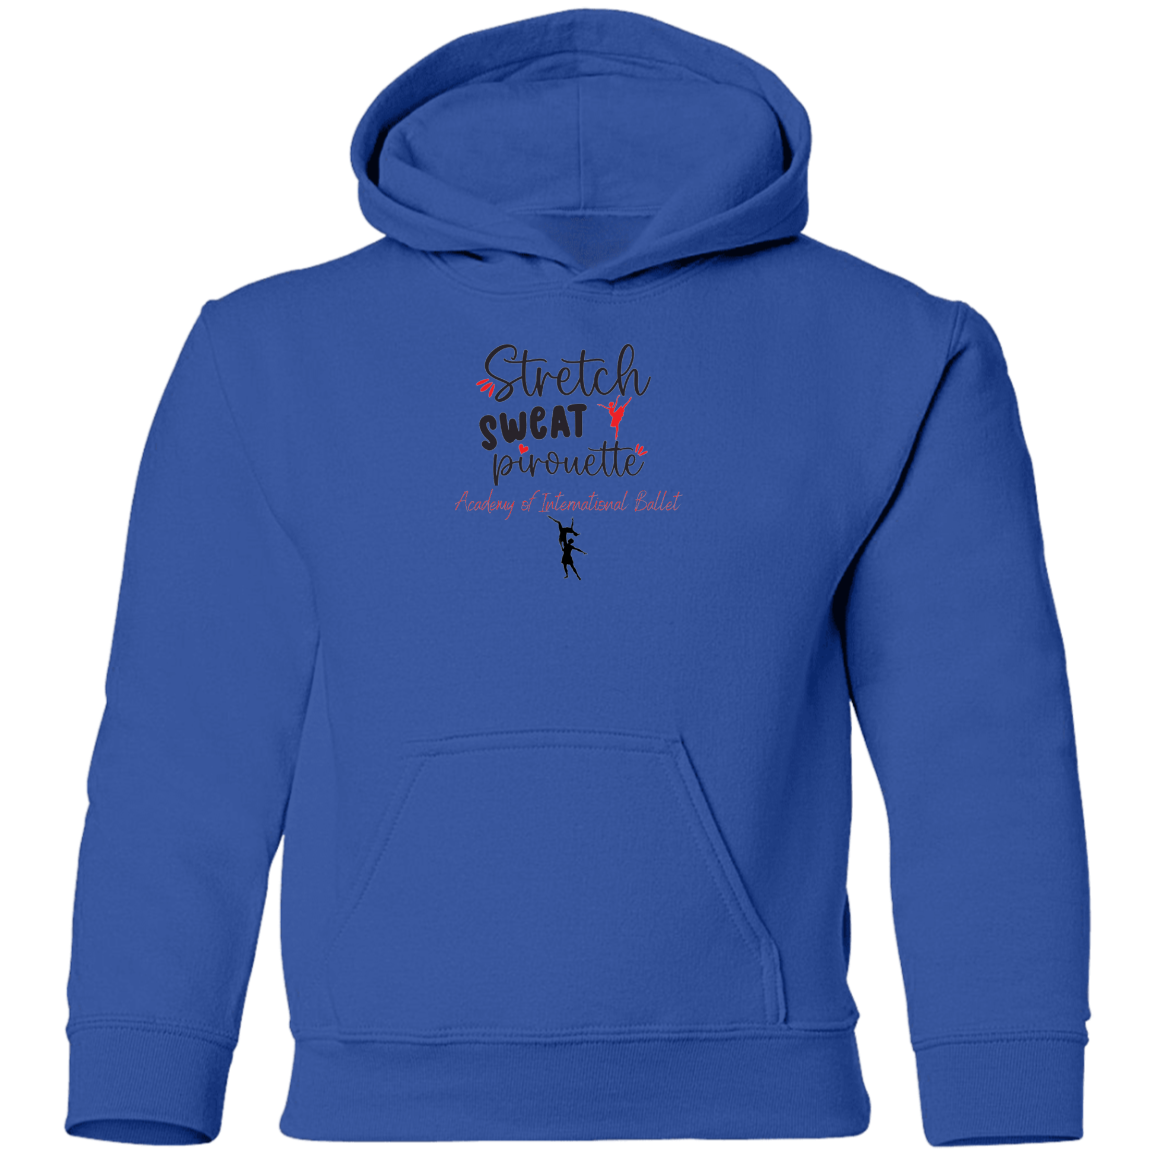 Stretch, Sweat, Pirouette- Youth Pullover Hoodie